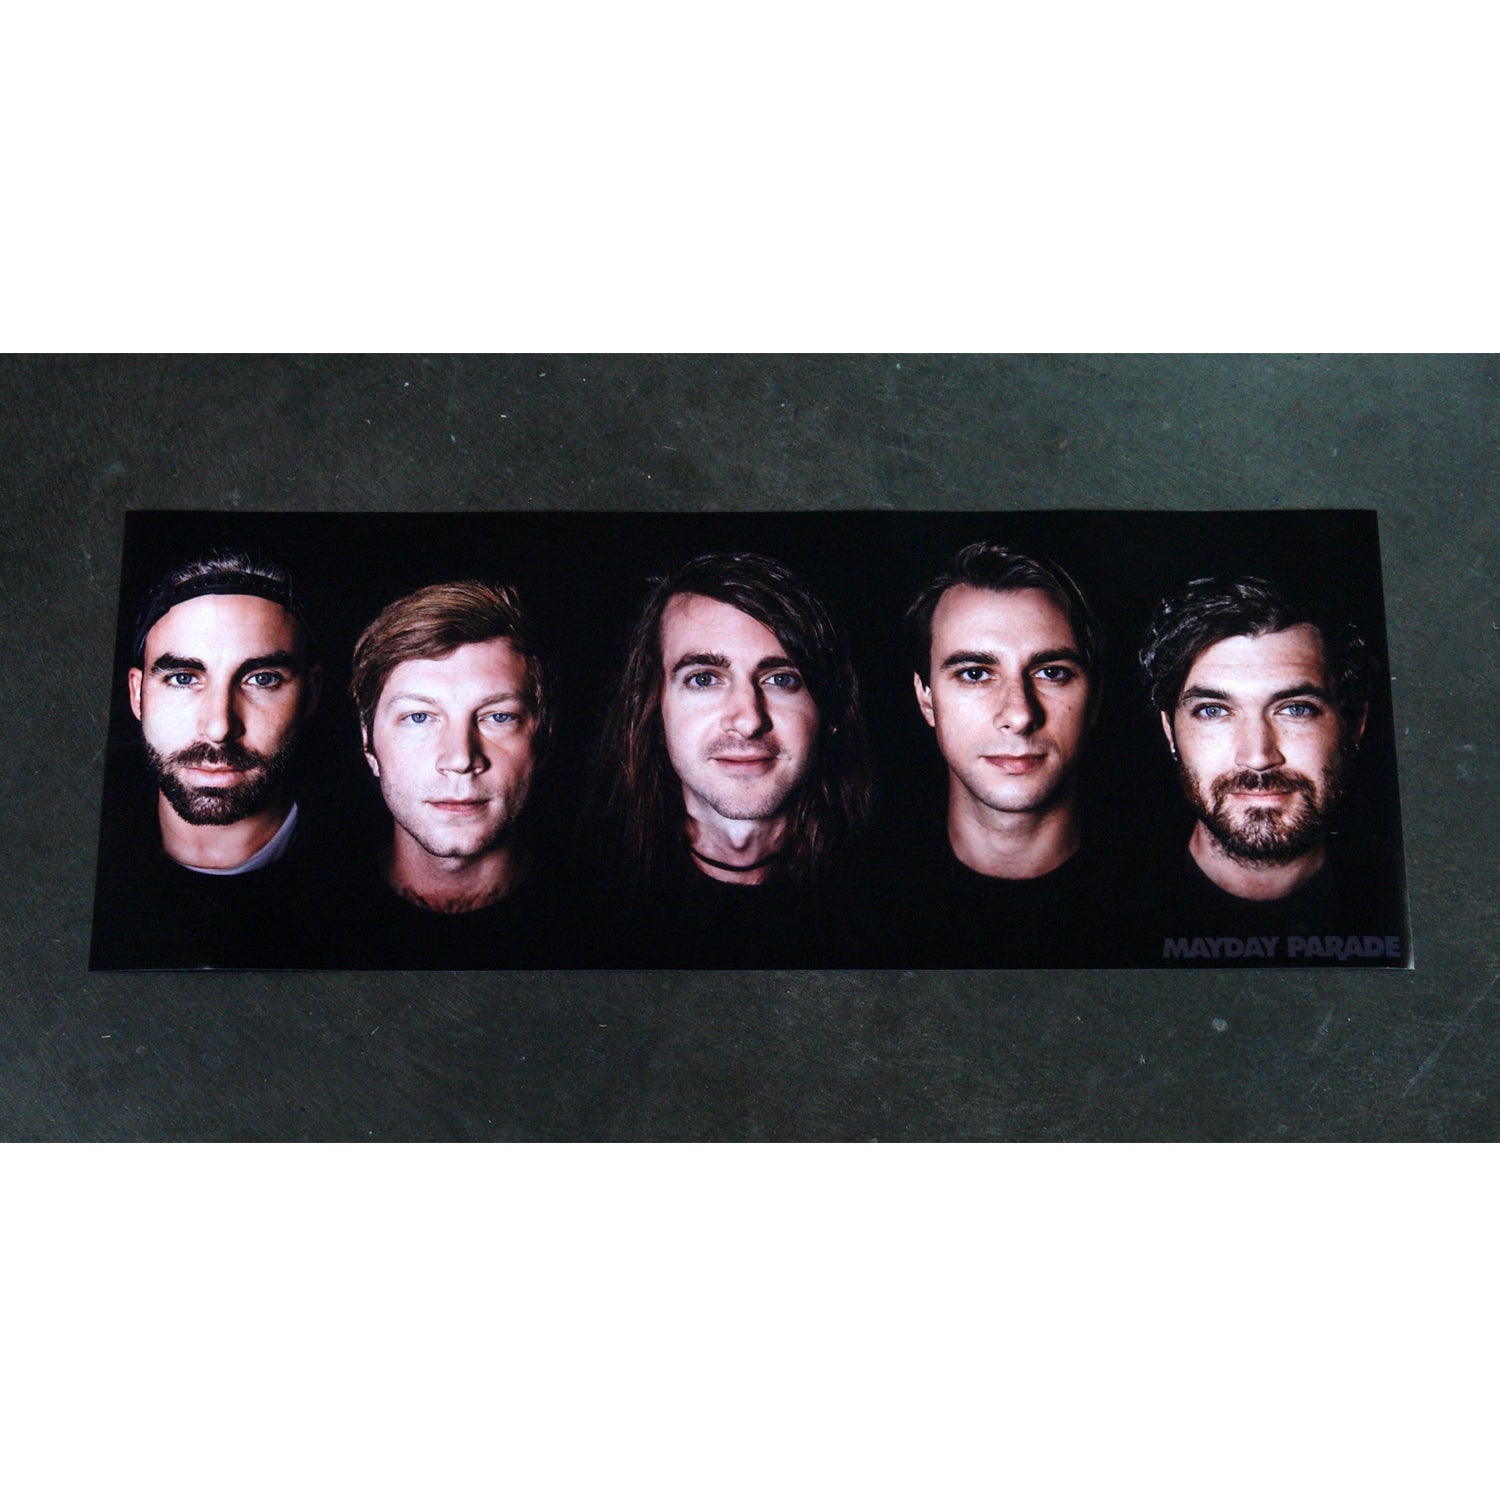 rectangle poster on a concrete background with 5 mens faces and mayday parade at the bottom right